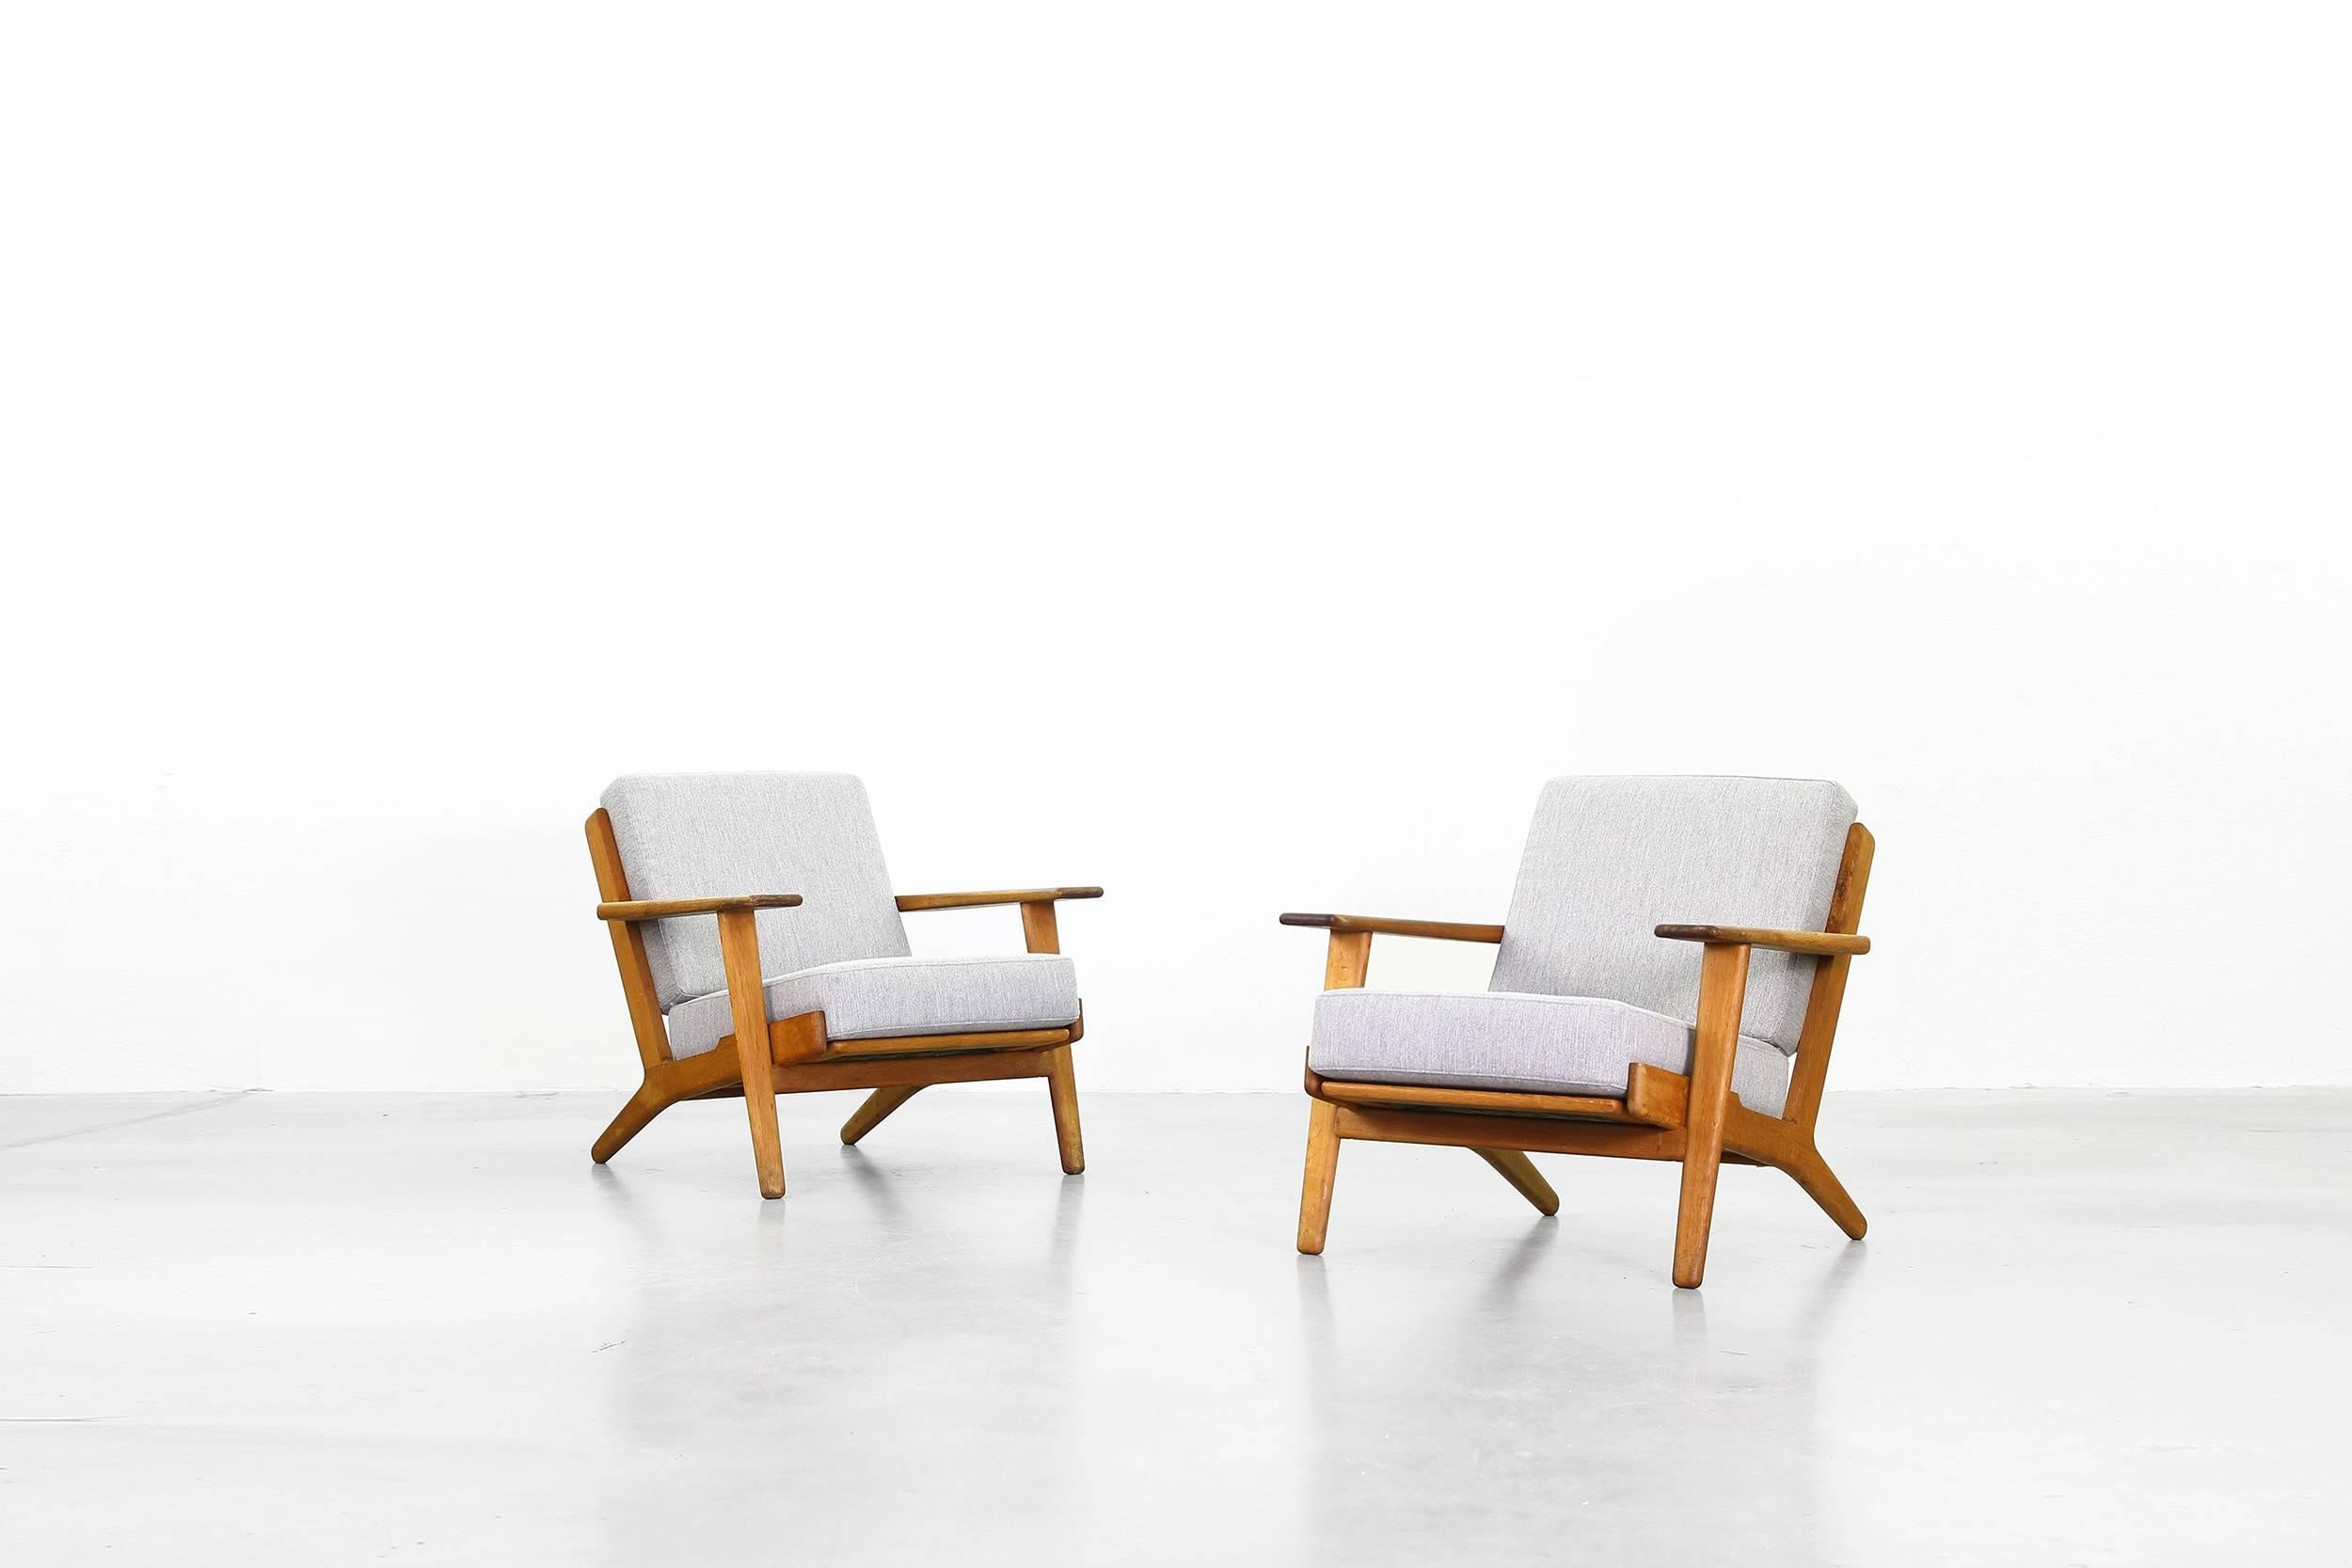 Beautiful pair of lounge chairs by Hans J. Wegner for GETAMA in 1960s, made in Denmark.
Both lounge chairs are in a beautiful condition with just little traces of usage. They are made of oak and were newly reupholstered in a dark grey high quality